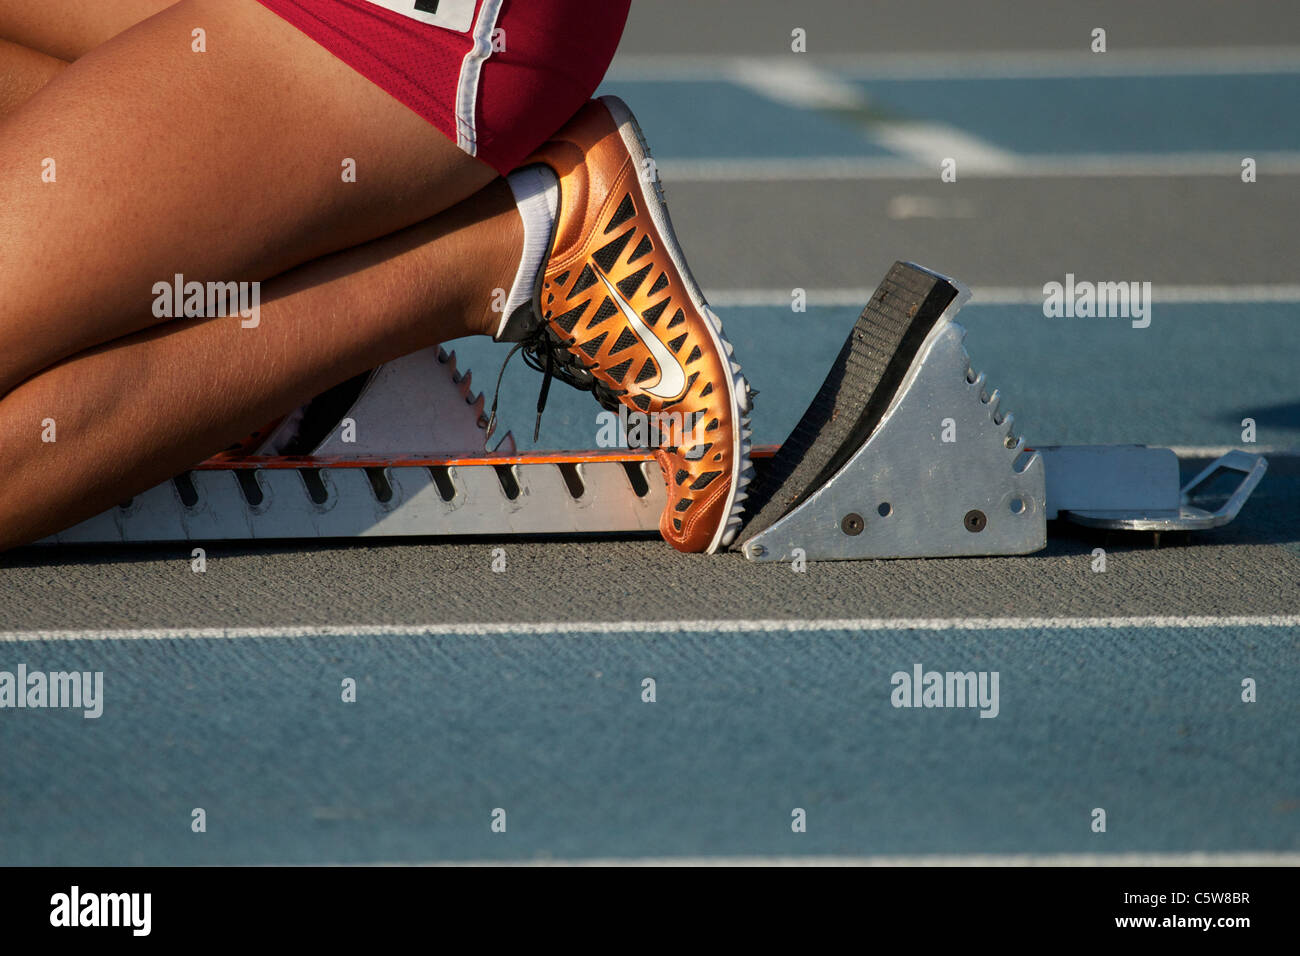 teenage girl in starting blocks on a blue and gray  running track Stock Photo